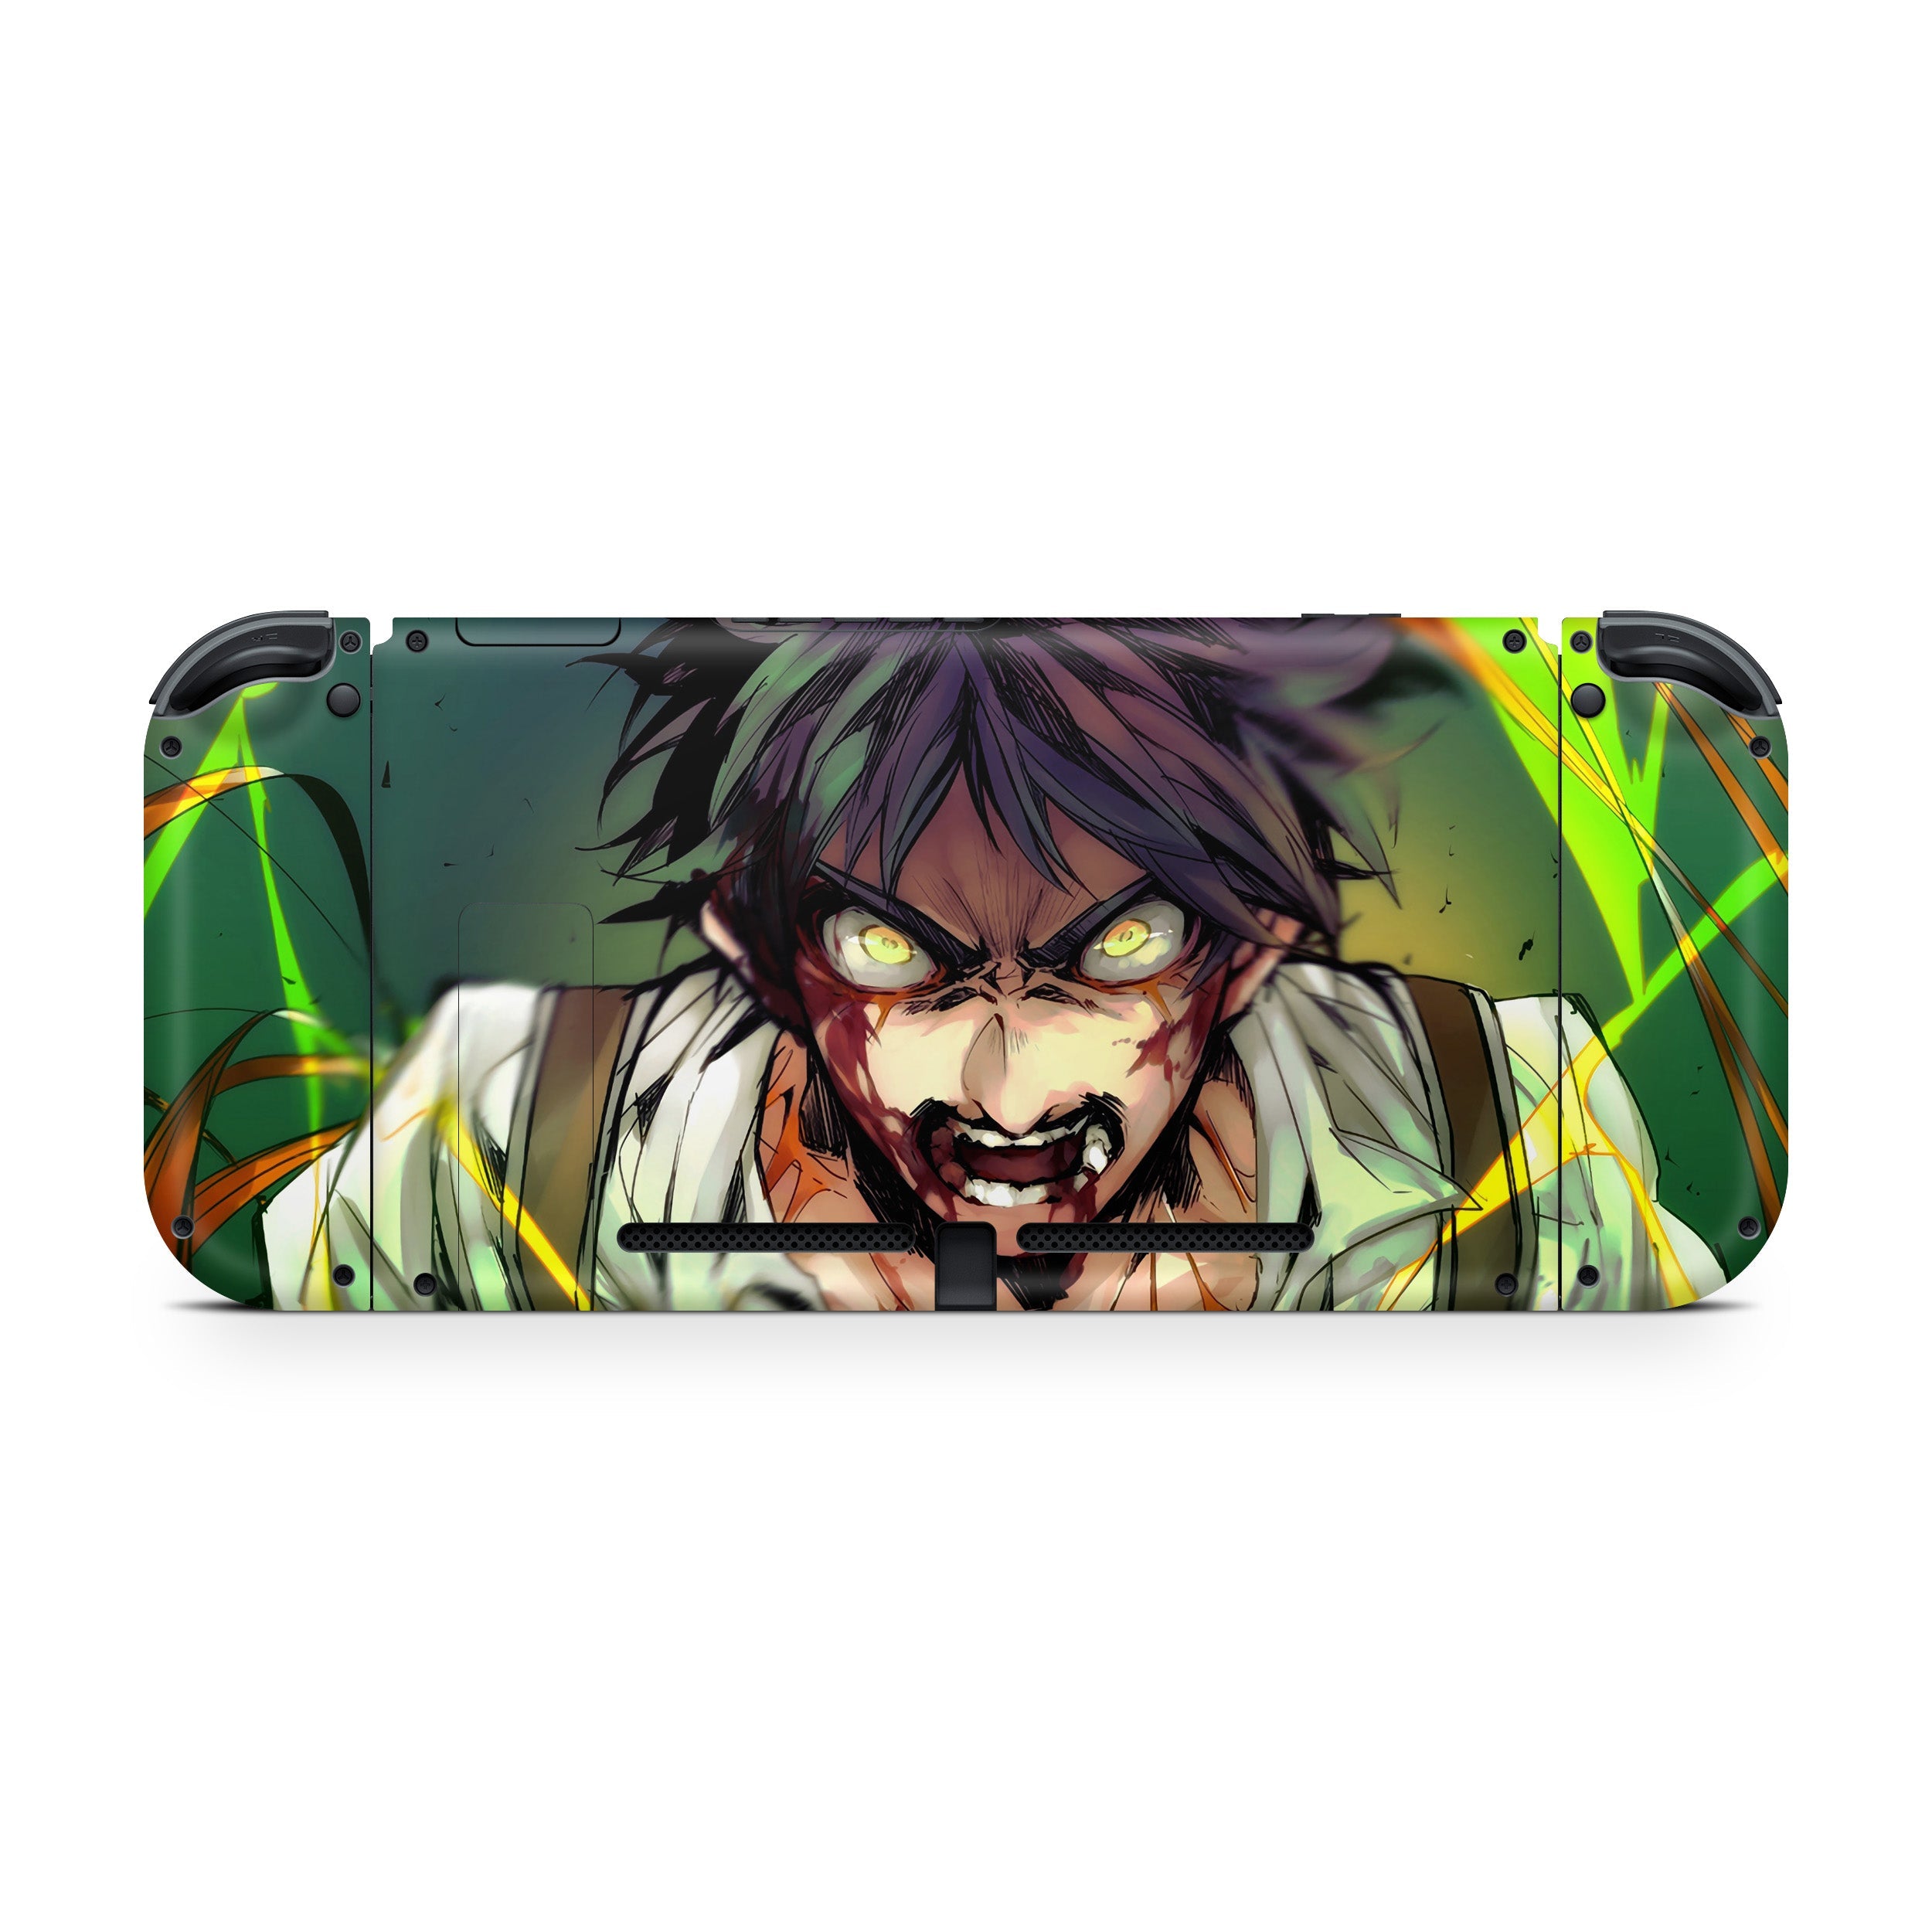 A video game skin featuring a Attack On Titan Eren Yeager design for the Nintendo Switch.